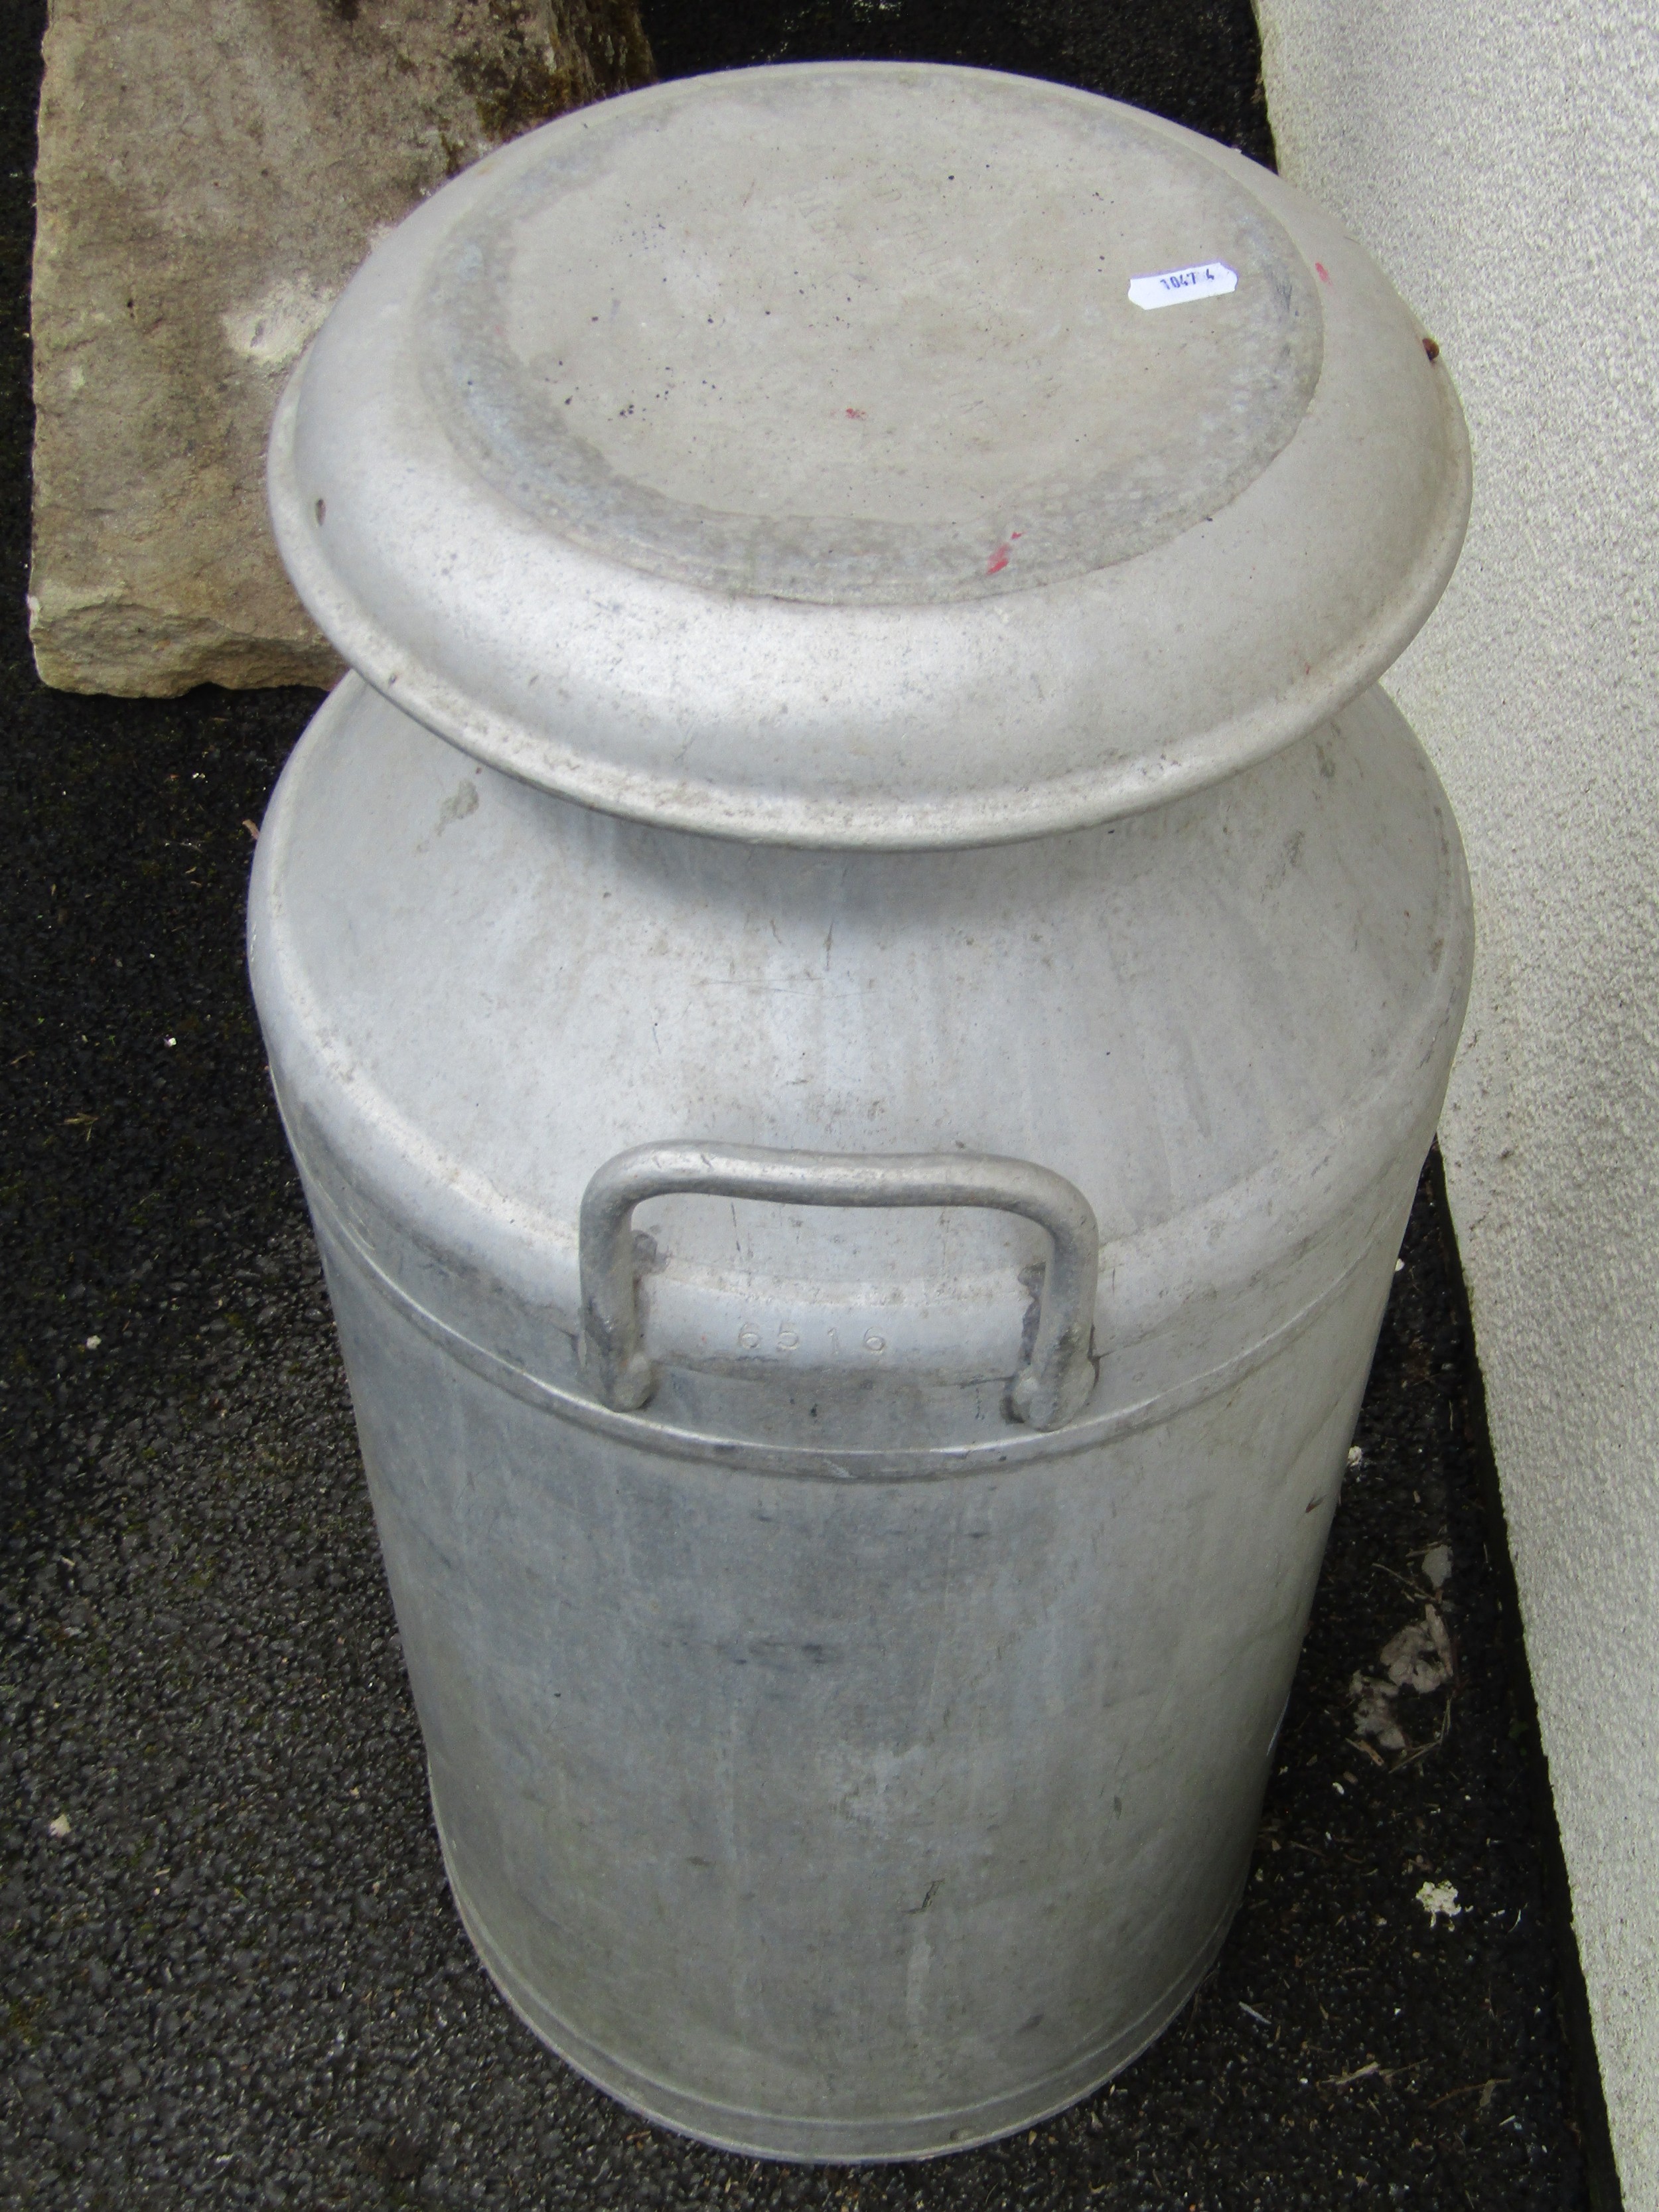 A Grundycan Excraven Dairies, Leeds aluminium two handled milk churn (complete with cap), 72 cm high - Image 3 of 5